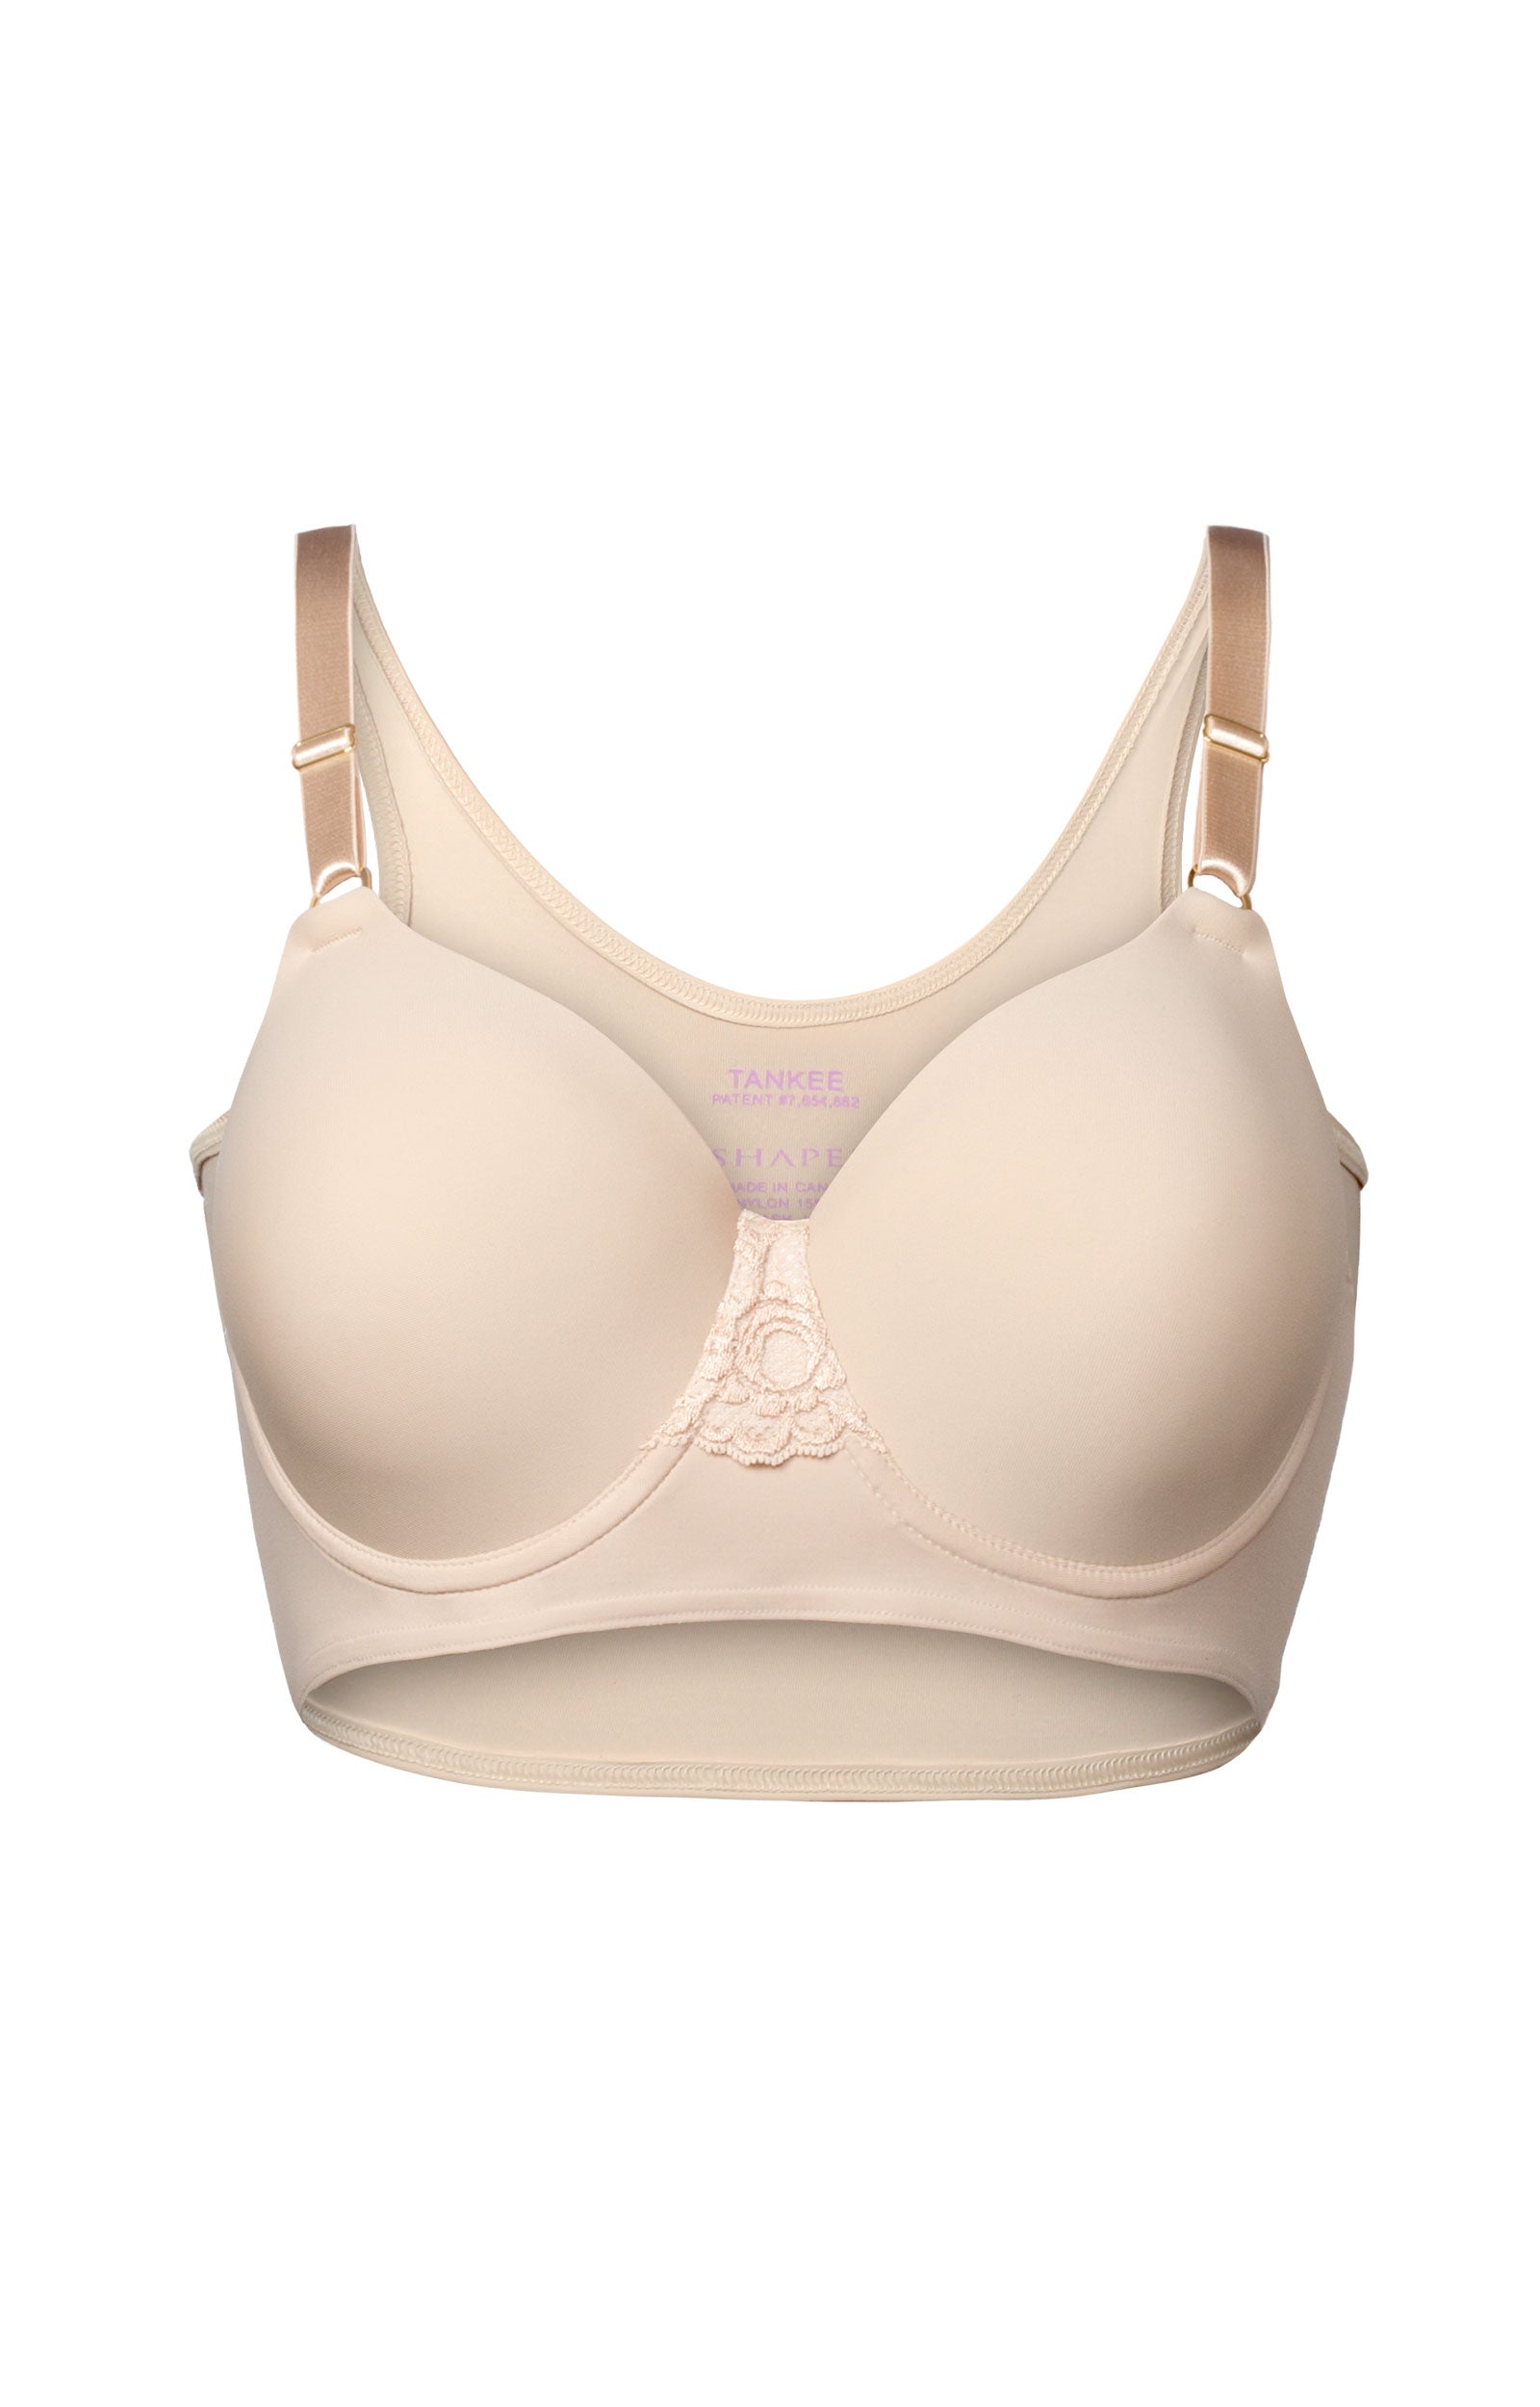 The Original Tankee Short Back-Smoothing Ultra Comfortable Tee-Shirt Bra  Virtually Invisible Under Knit Tops - Shapeez Canada